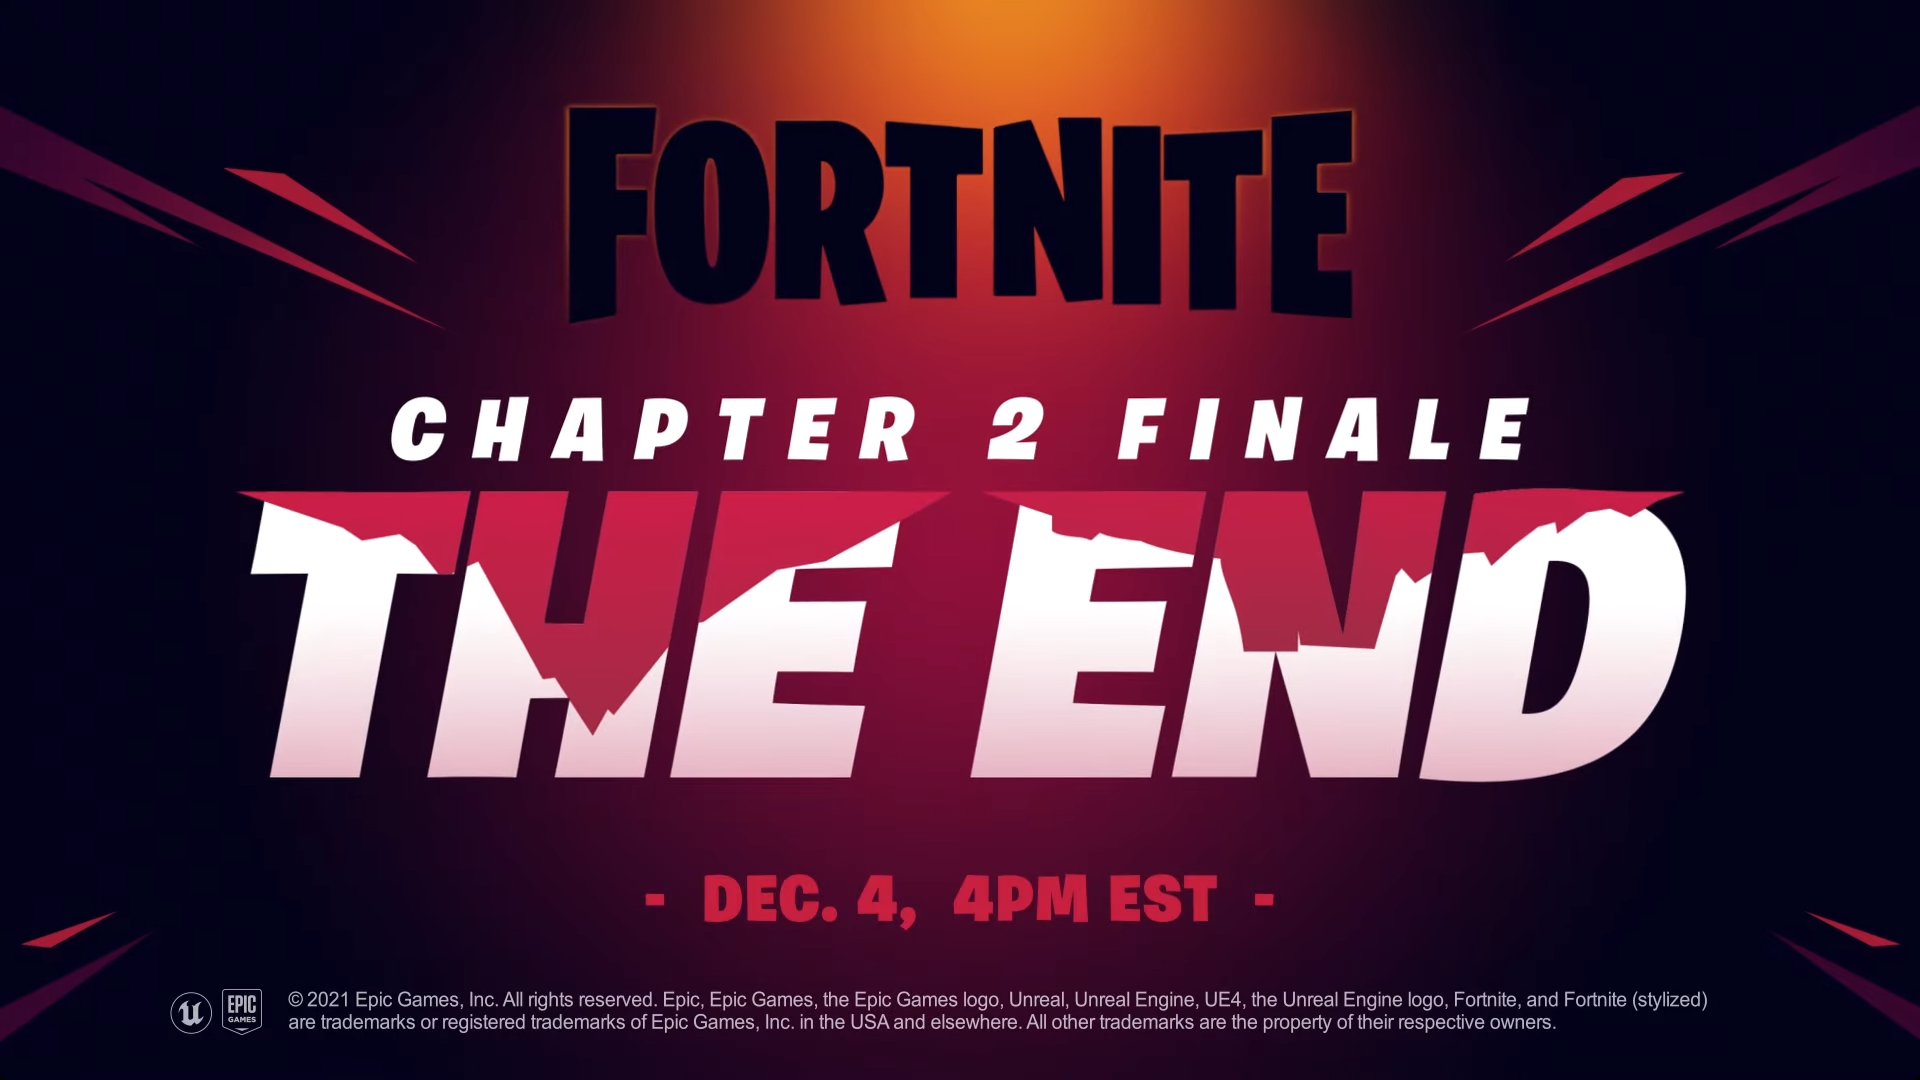 Fortnite officially announces Chapter 2 Finale Event: The End